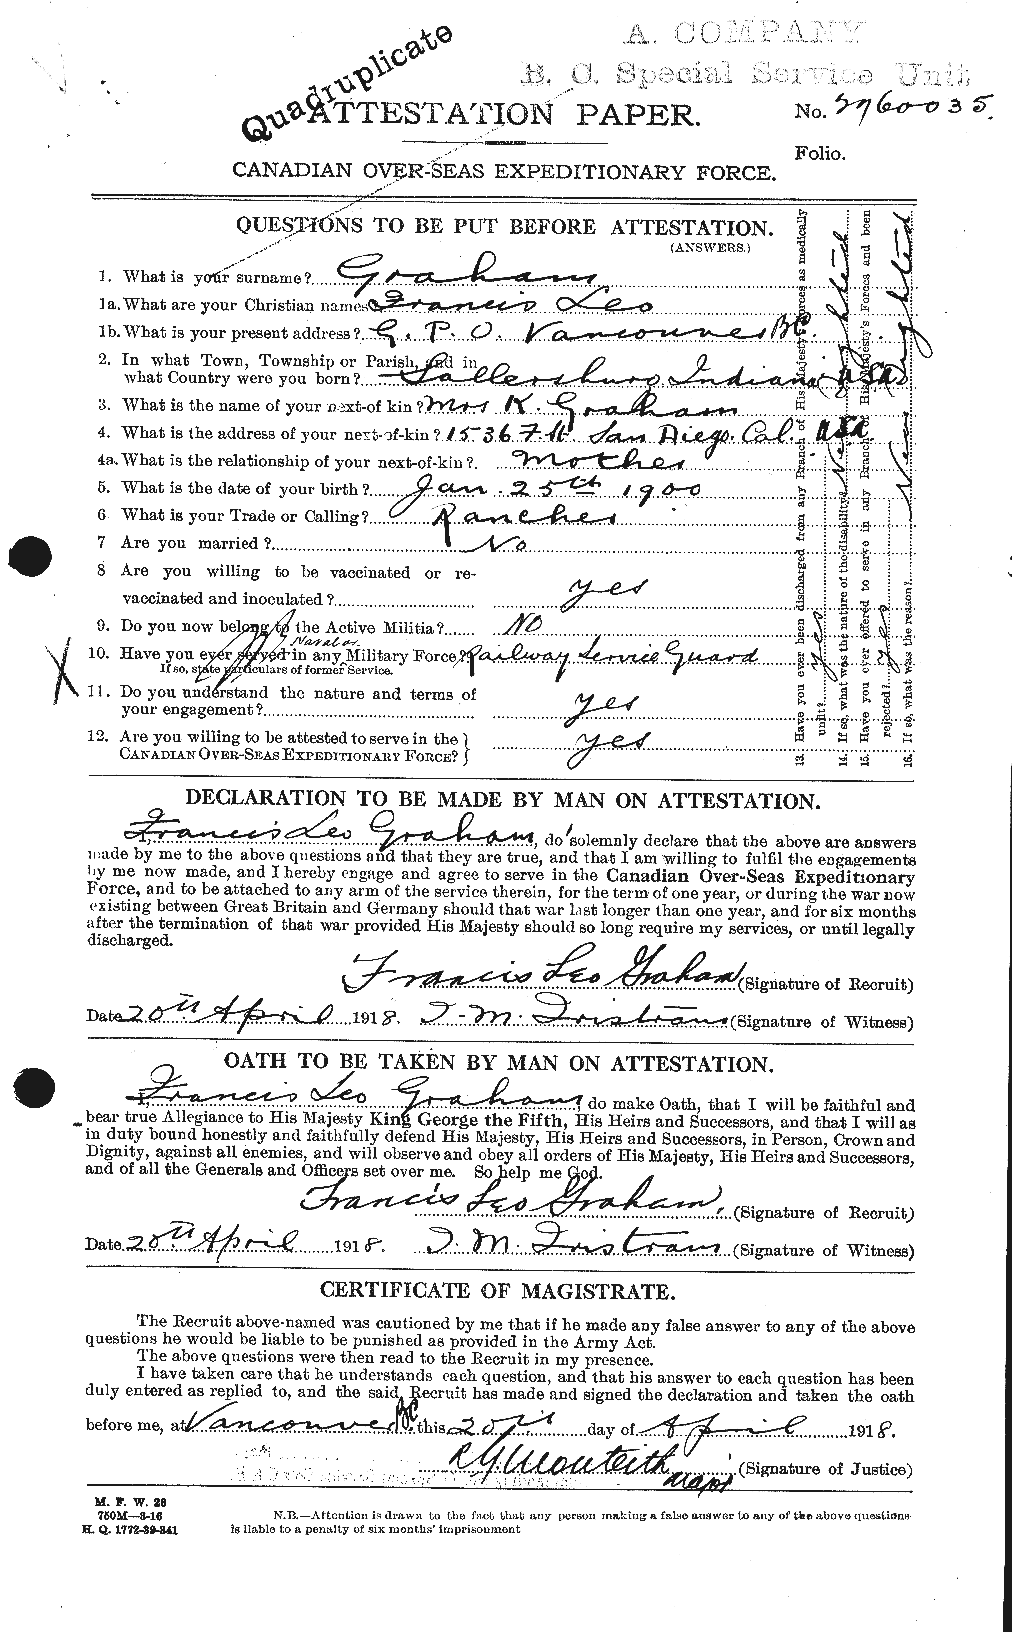 Personnel Records of the First World War - CEF 357579a